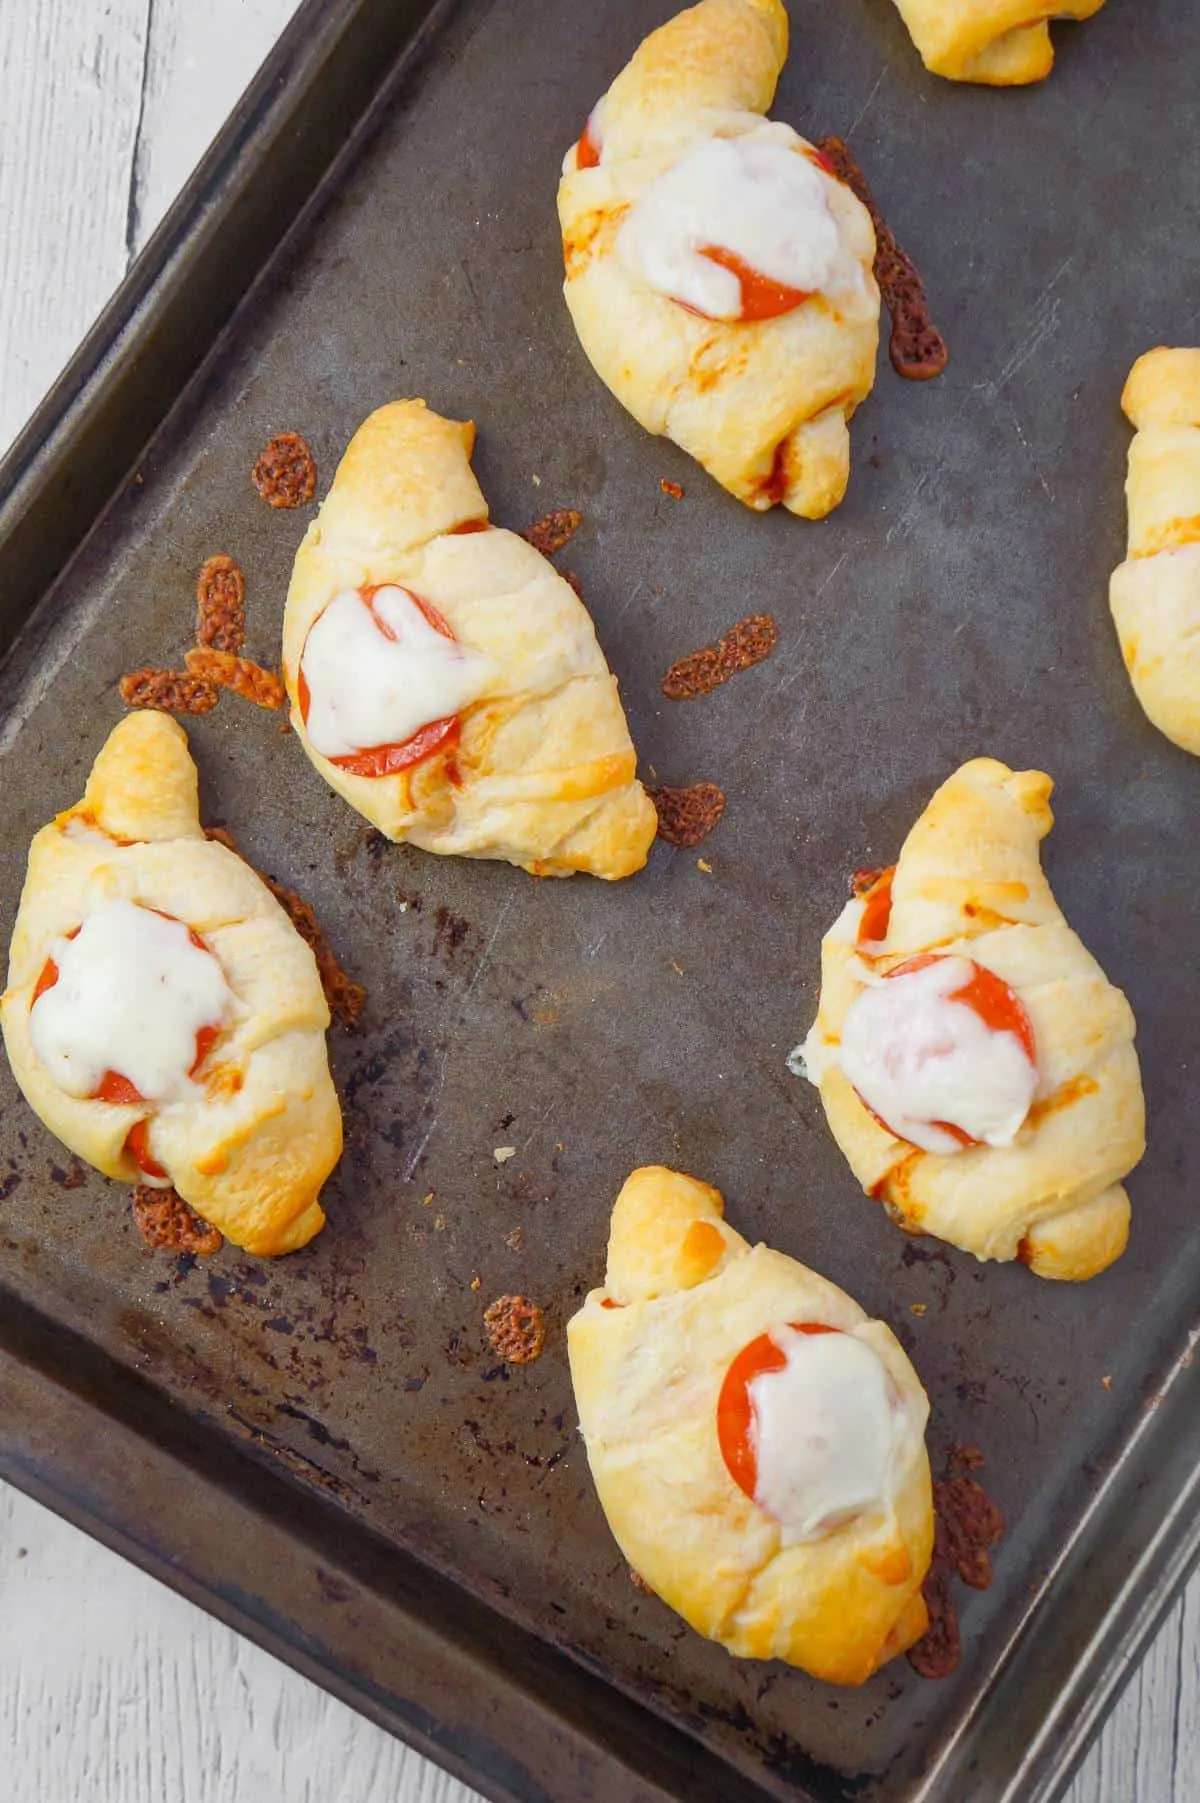 Pizza Crescent Rolls are an easy dinner or party snack recipe using Pillsbury crescent rolls, pepperoni, mozzarella cheese and pizza sauce.